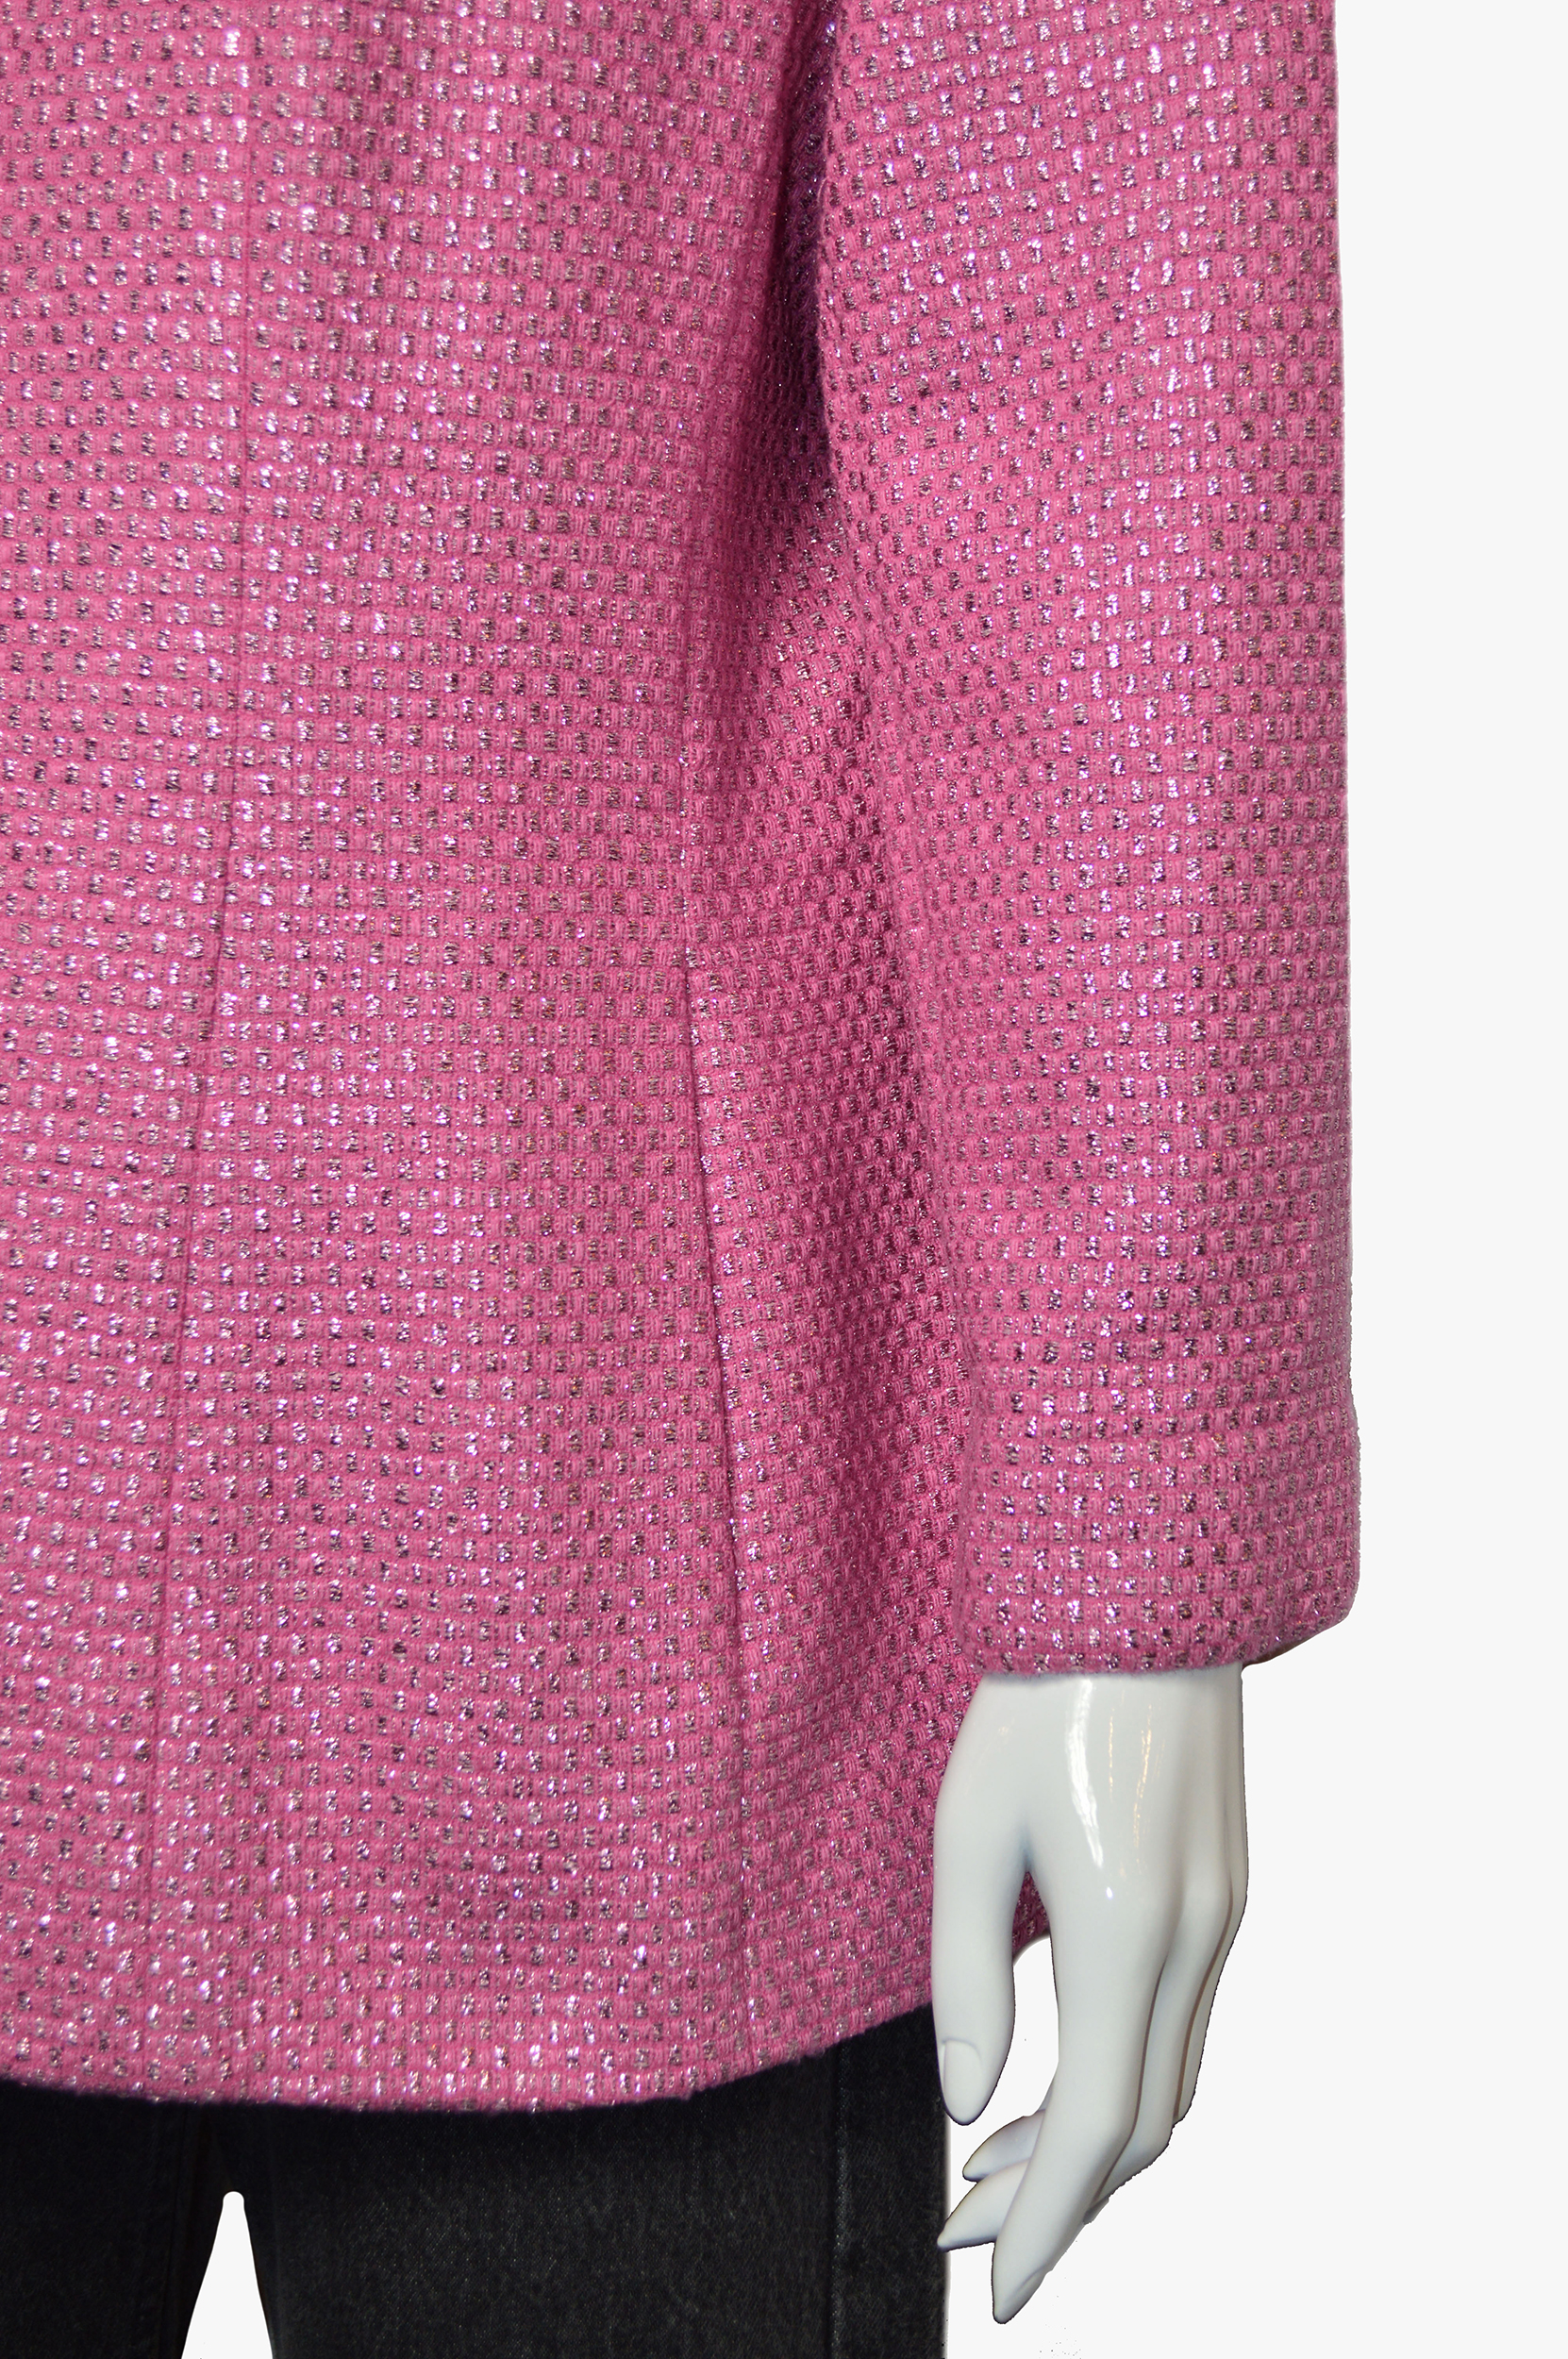 Chanel pink and metallic Vintage blazer, Cruise 2001 collection-5